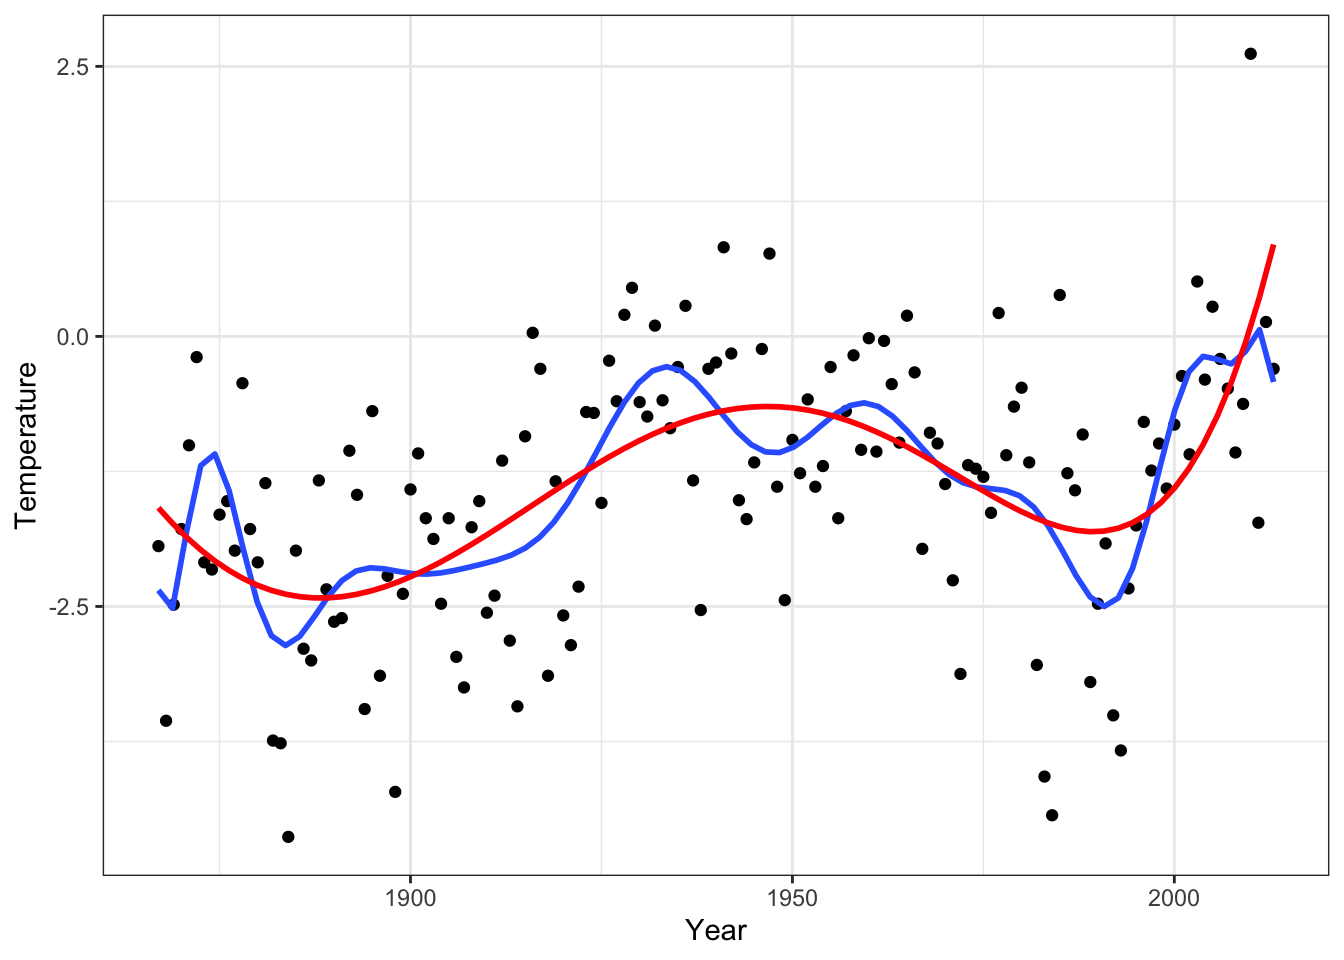 Polynomial fit using all 19 basis functions (blue) and using a degree 5 polynomial (red).